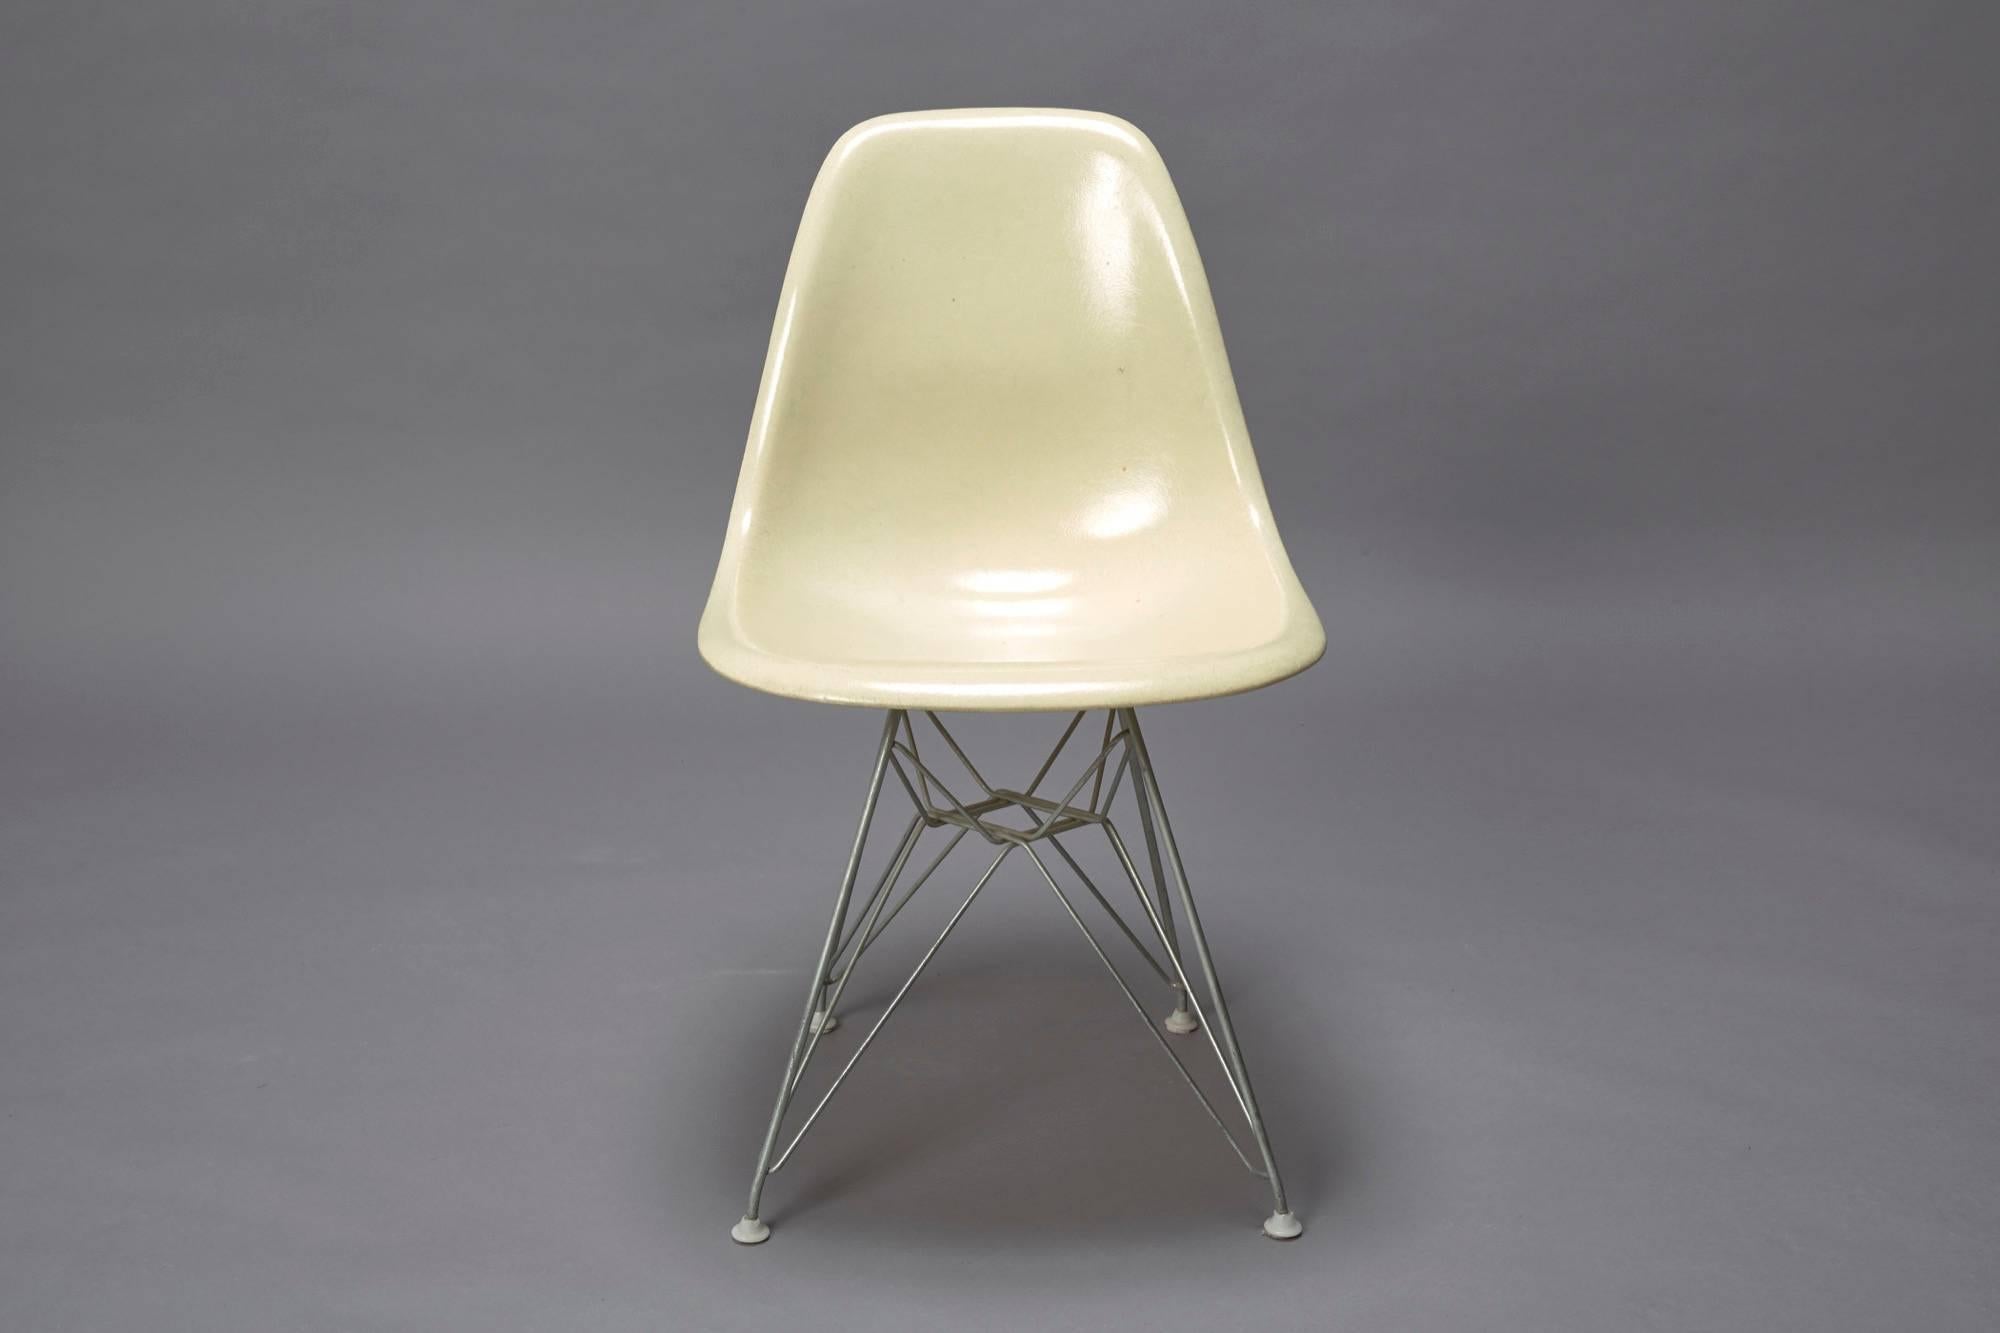 This chair is designed by Charles Eames and produced by Herman Miller in the 1950s. The armless fiberglass bucket/shell chair is on it's original Eiffel base.